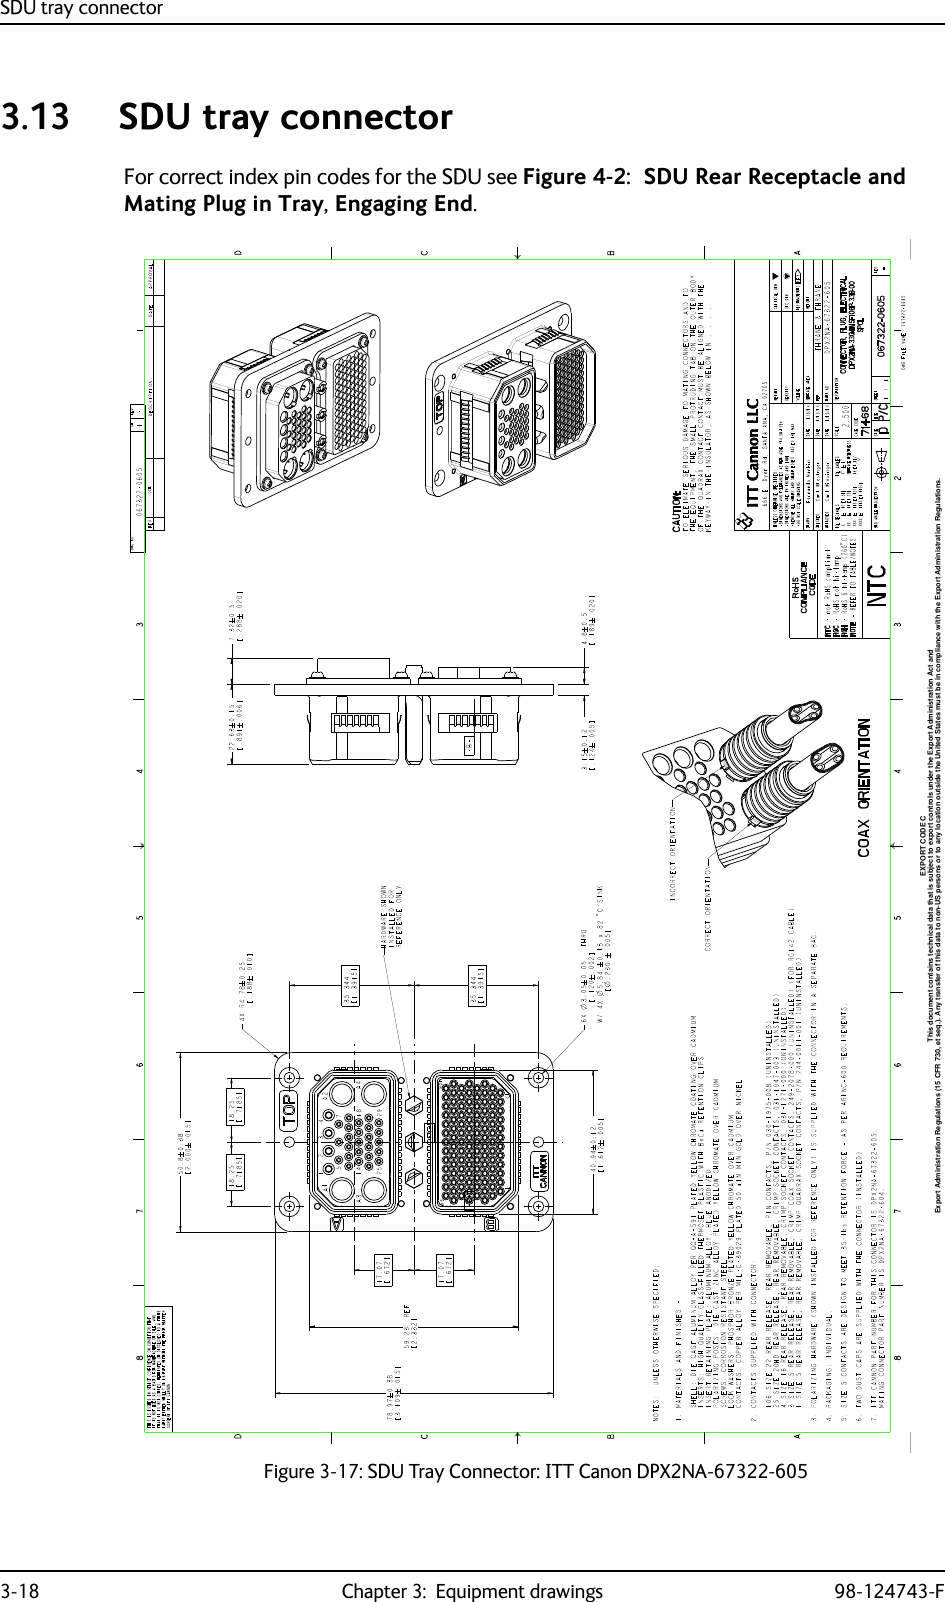 SDU tray connector3-18 Chapter 3:  Equipment drawings 98-124743-F3.13 SDU tray connectorFor correct index pin codes for the SDU see Figure 4-2:  SDU Rear Receptacle and Mating Plug in Tray, Engaging End.Figure 3-17: SDU Tray Connector: ITT Canon DPX2NA-67322-605Export Administration Regulations (15 CFR 730, et seq.). Any transfer of this data to non-US persons or to any location outside the United States must be in compliance with the Export Administration Regulations.This document contains technical data that is subject to export controls under the Export Administration Act andEXPORT CODE C